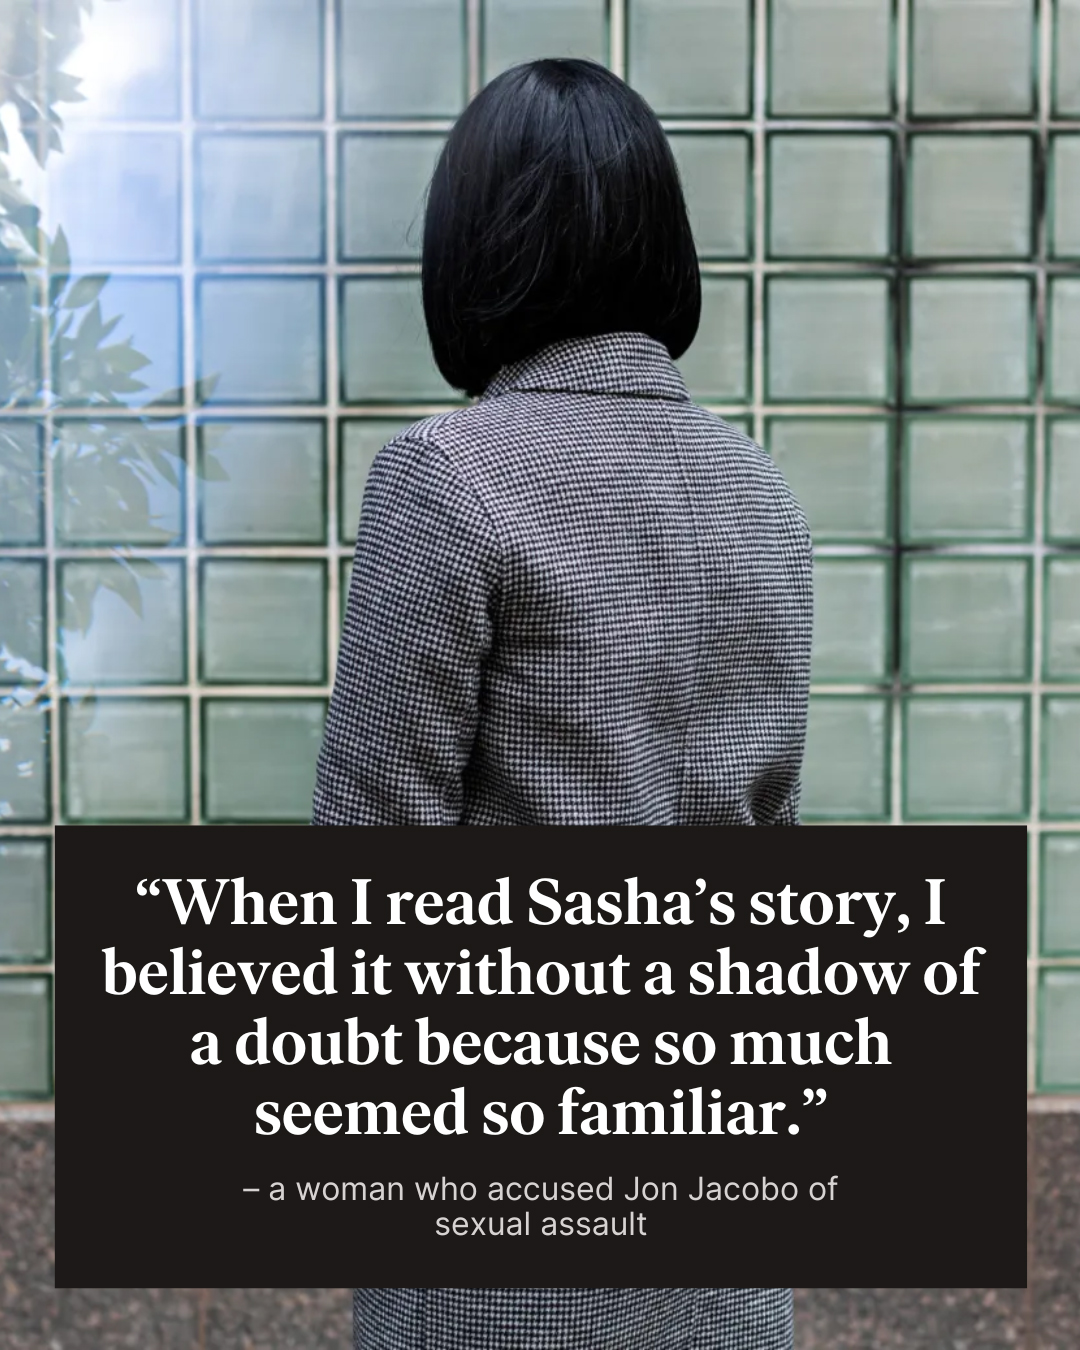 A woman stands facing away in front of glass blocks, with an overlaid quote about believing a sexual assault story.